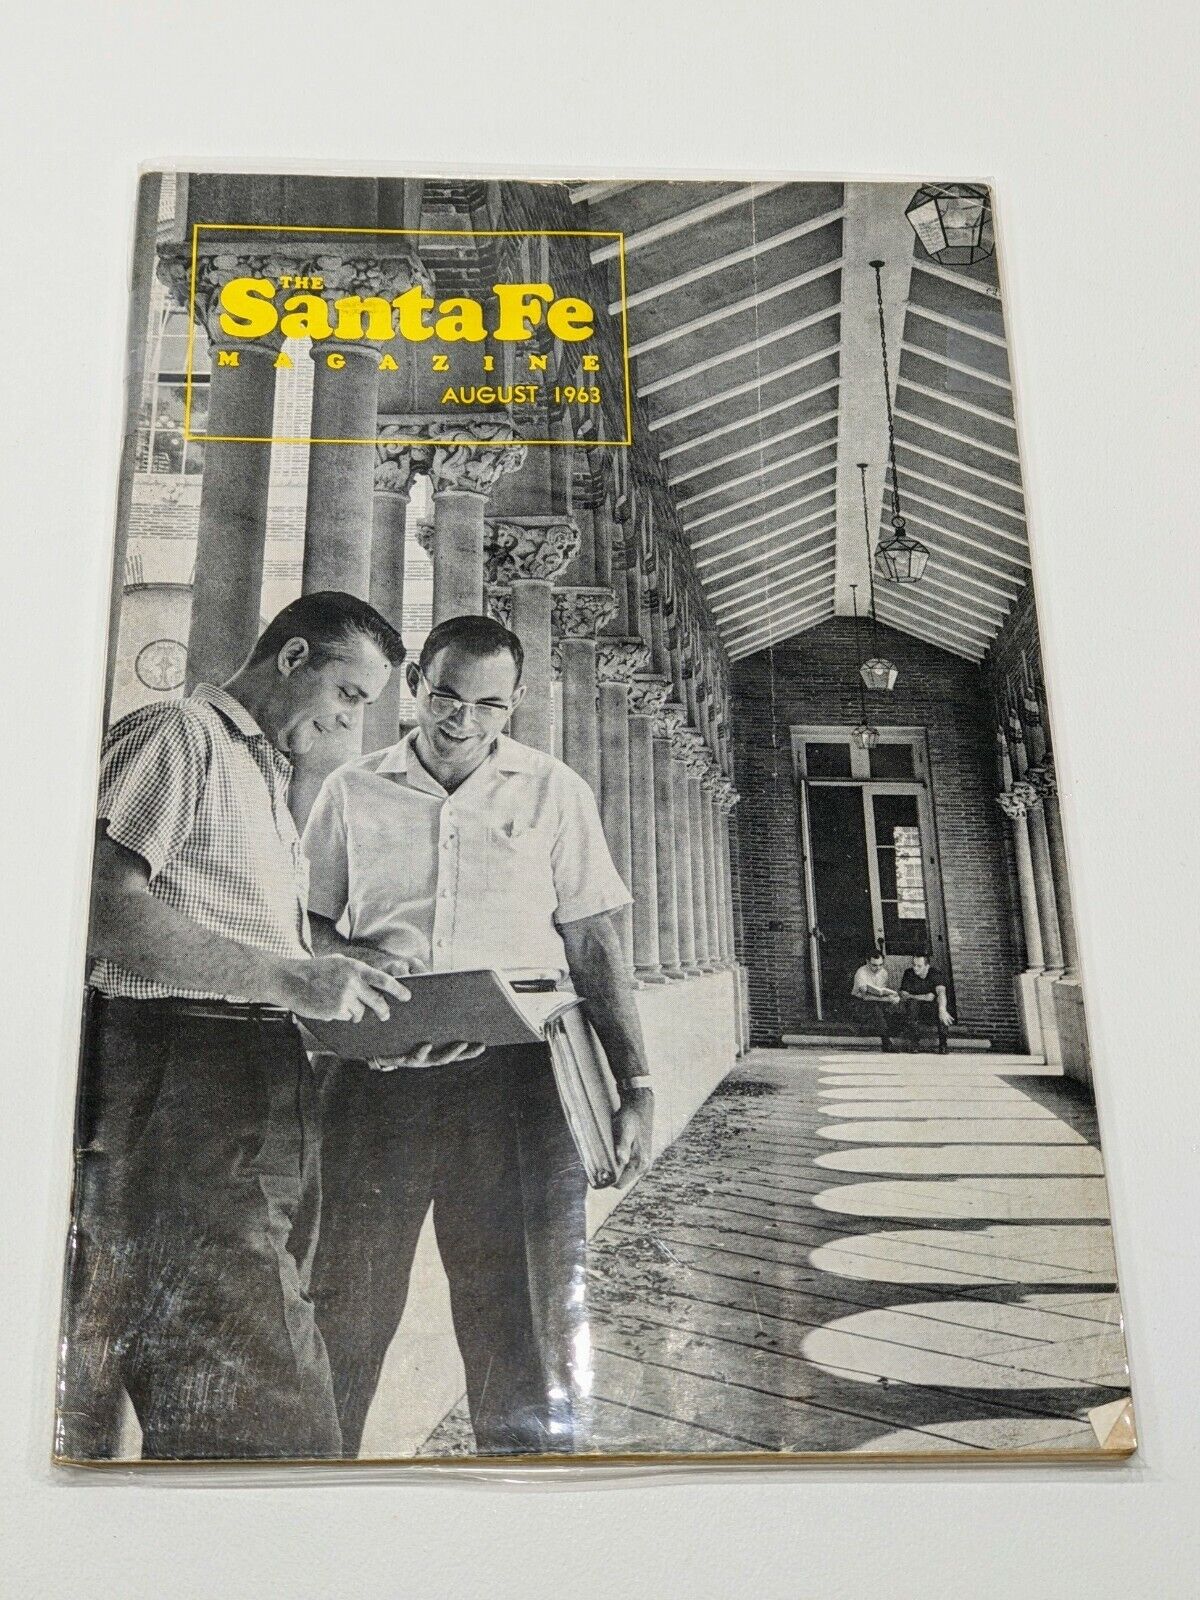 The Santa Fe Magazine August 1963  a great hall to learn in